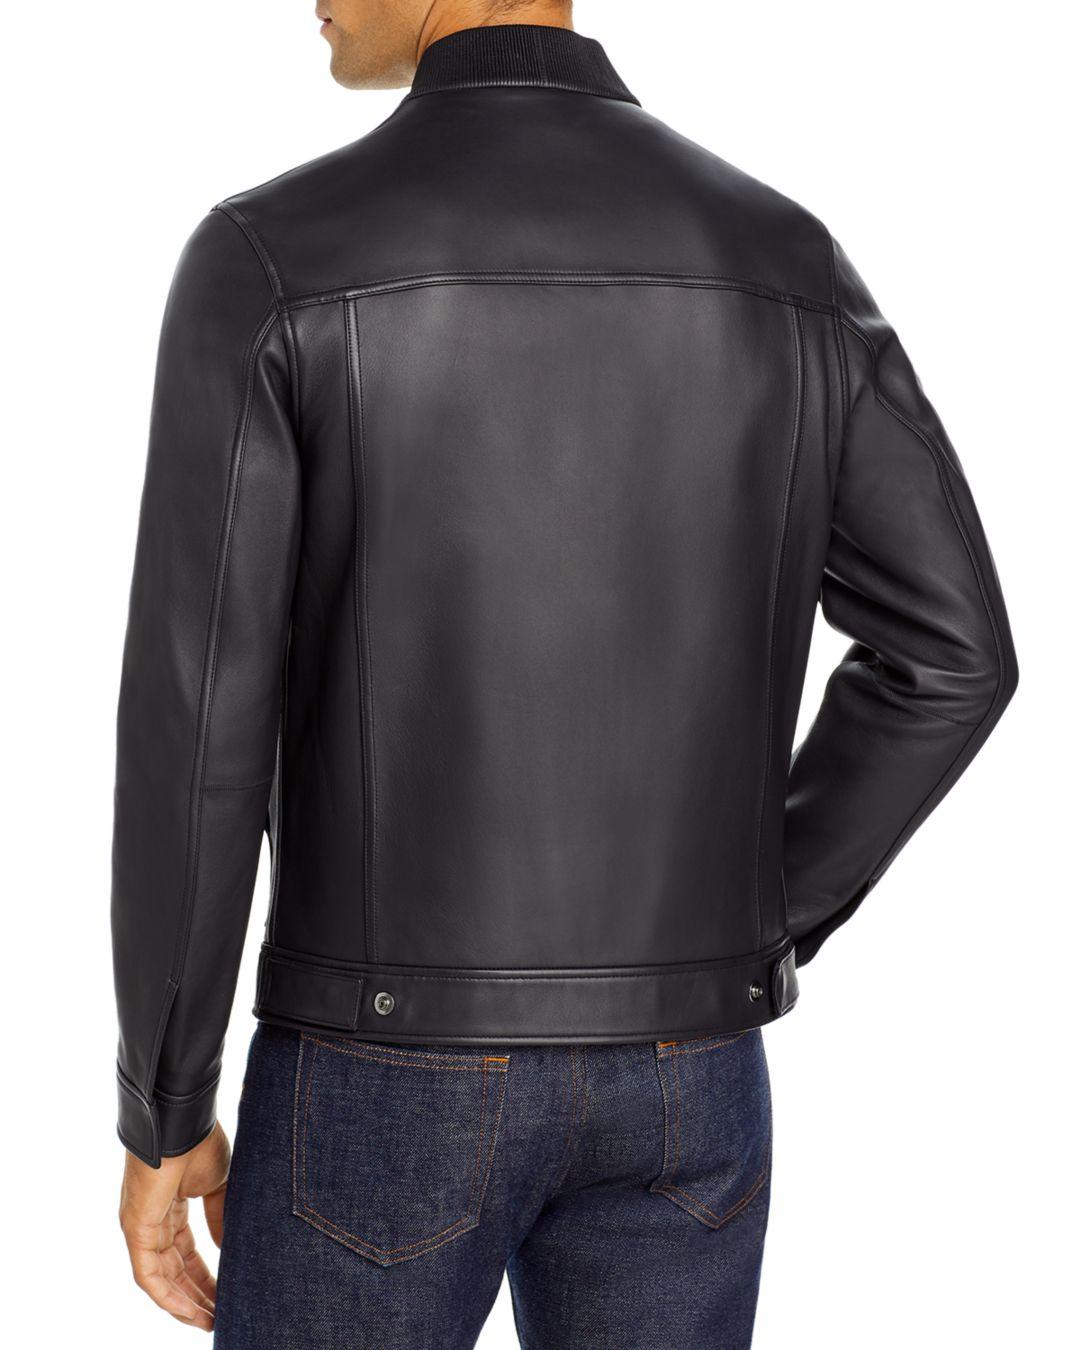 Theory Fletcher Plover Leather Jacket in Black for Men - Lyst